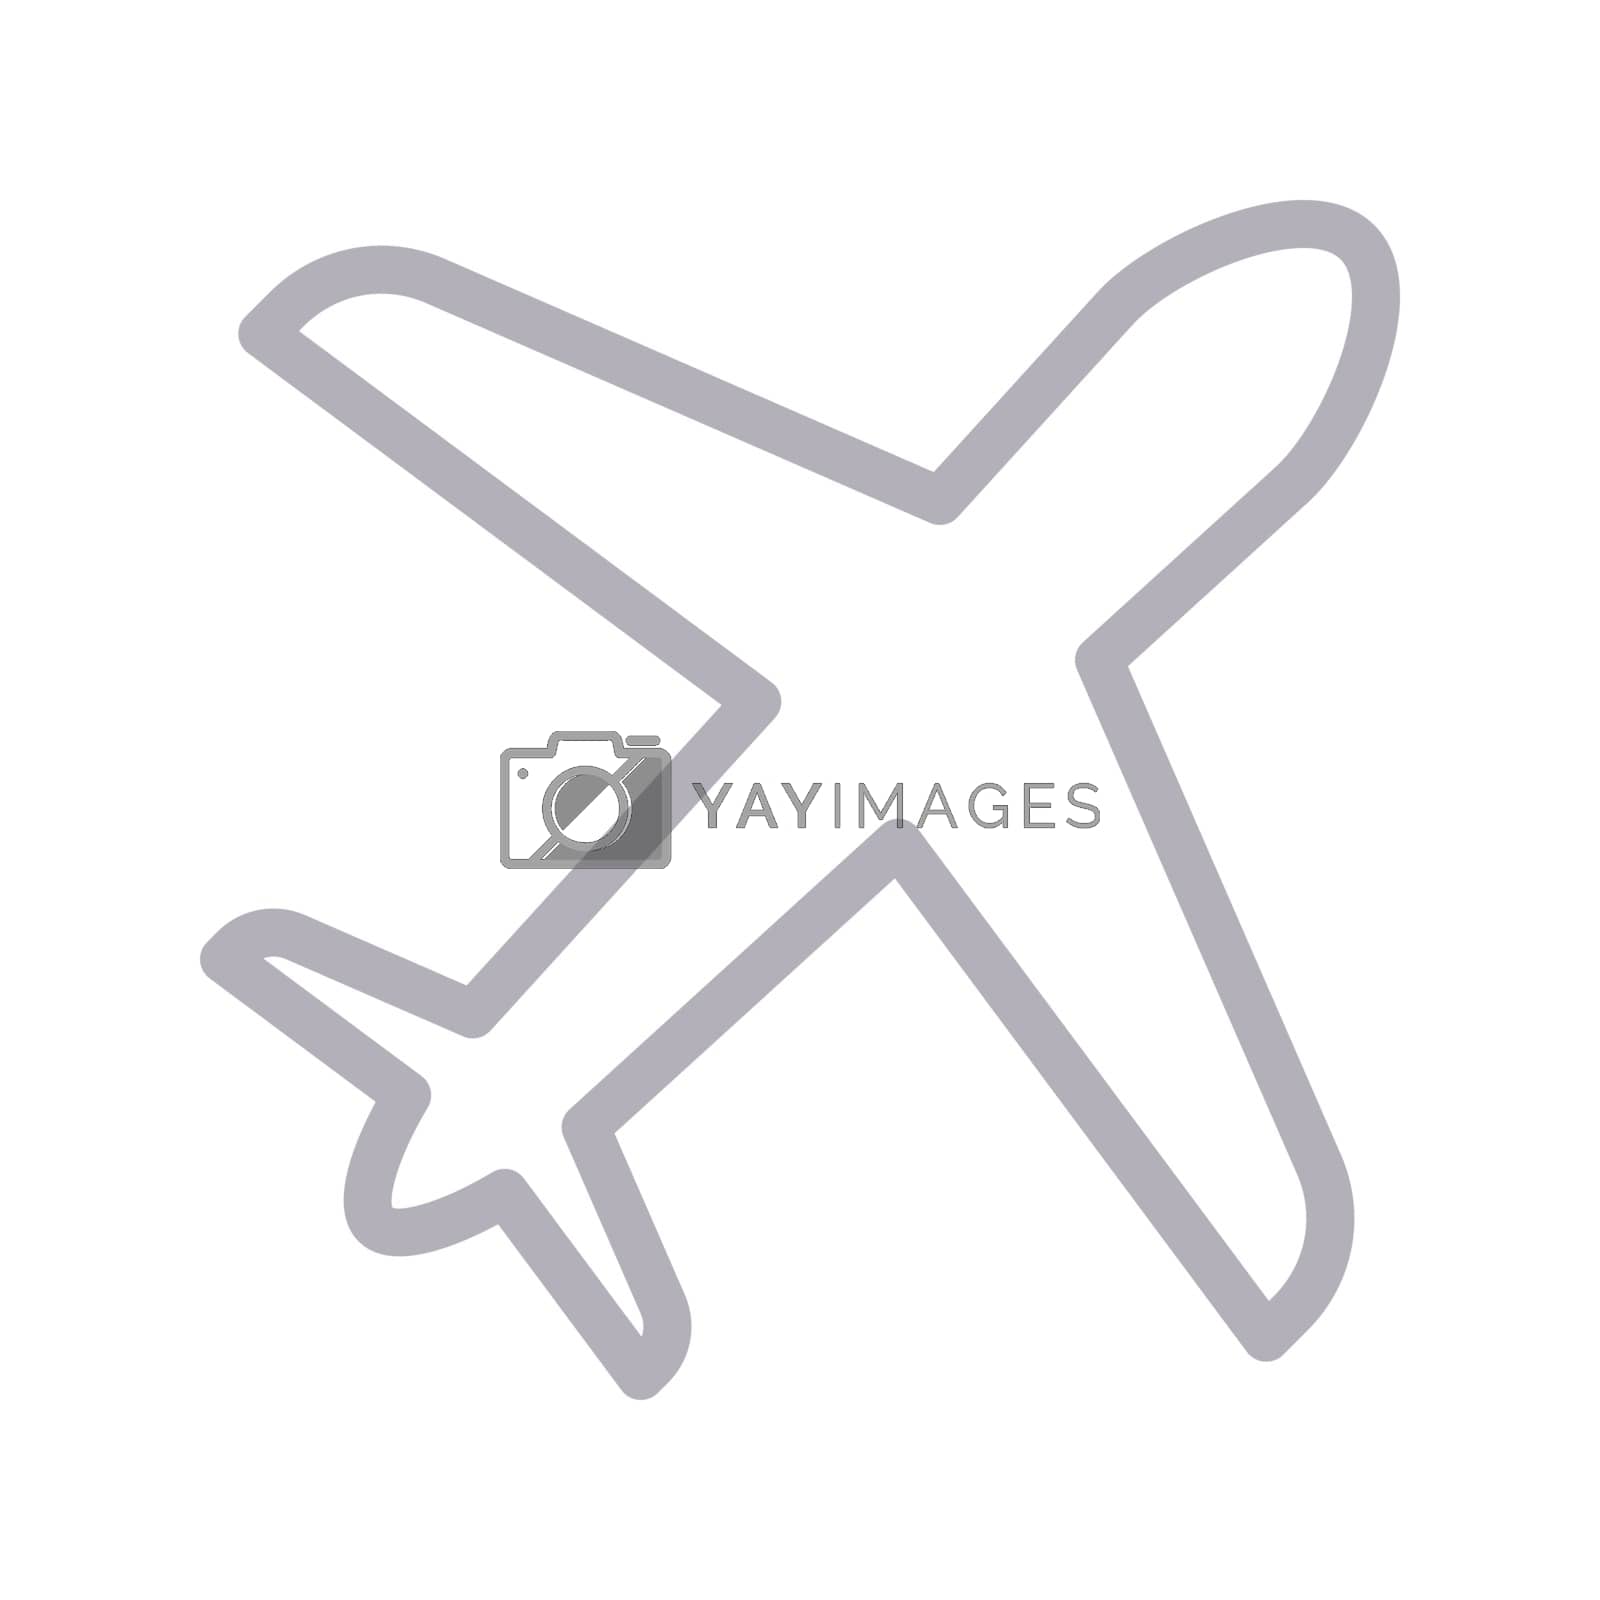 Royalty free image of travel by vectorstall